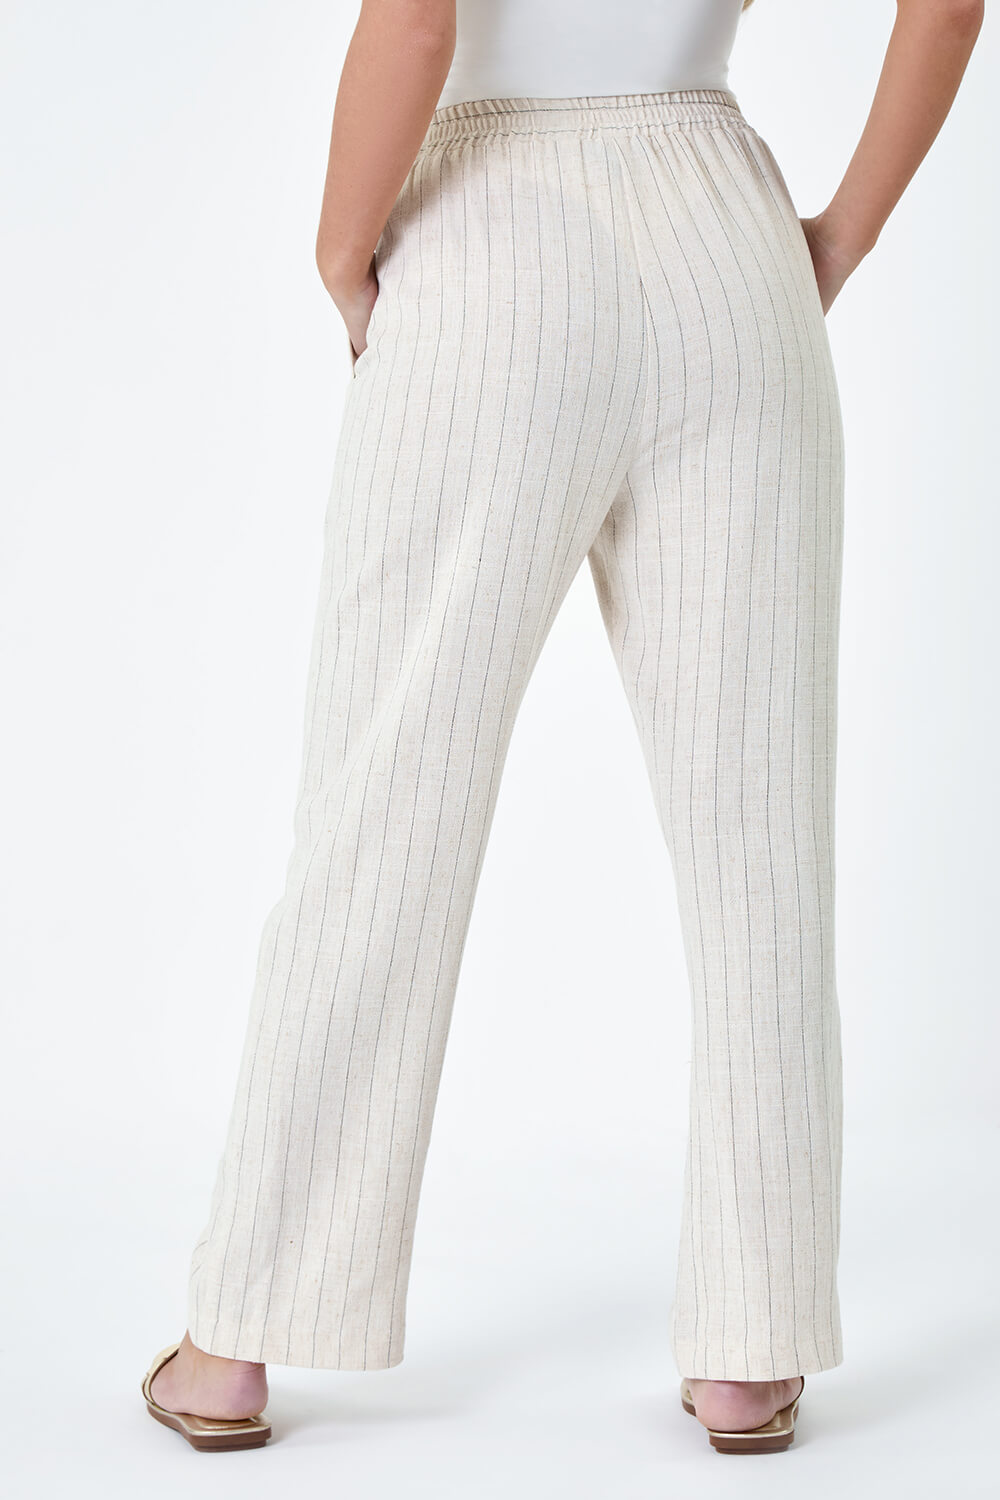 Natural  Petite Linen Blend Stripe Trousers, Image 3 of 5